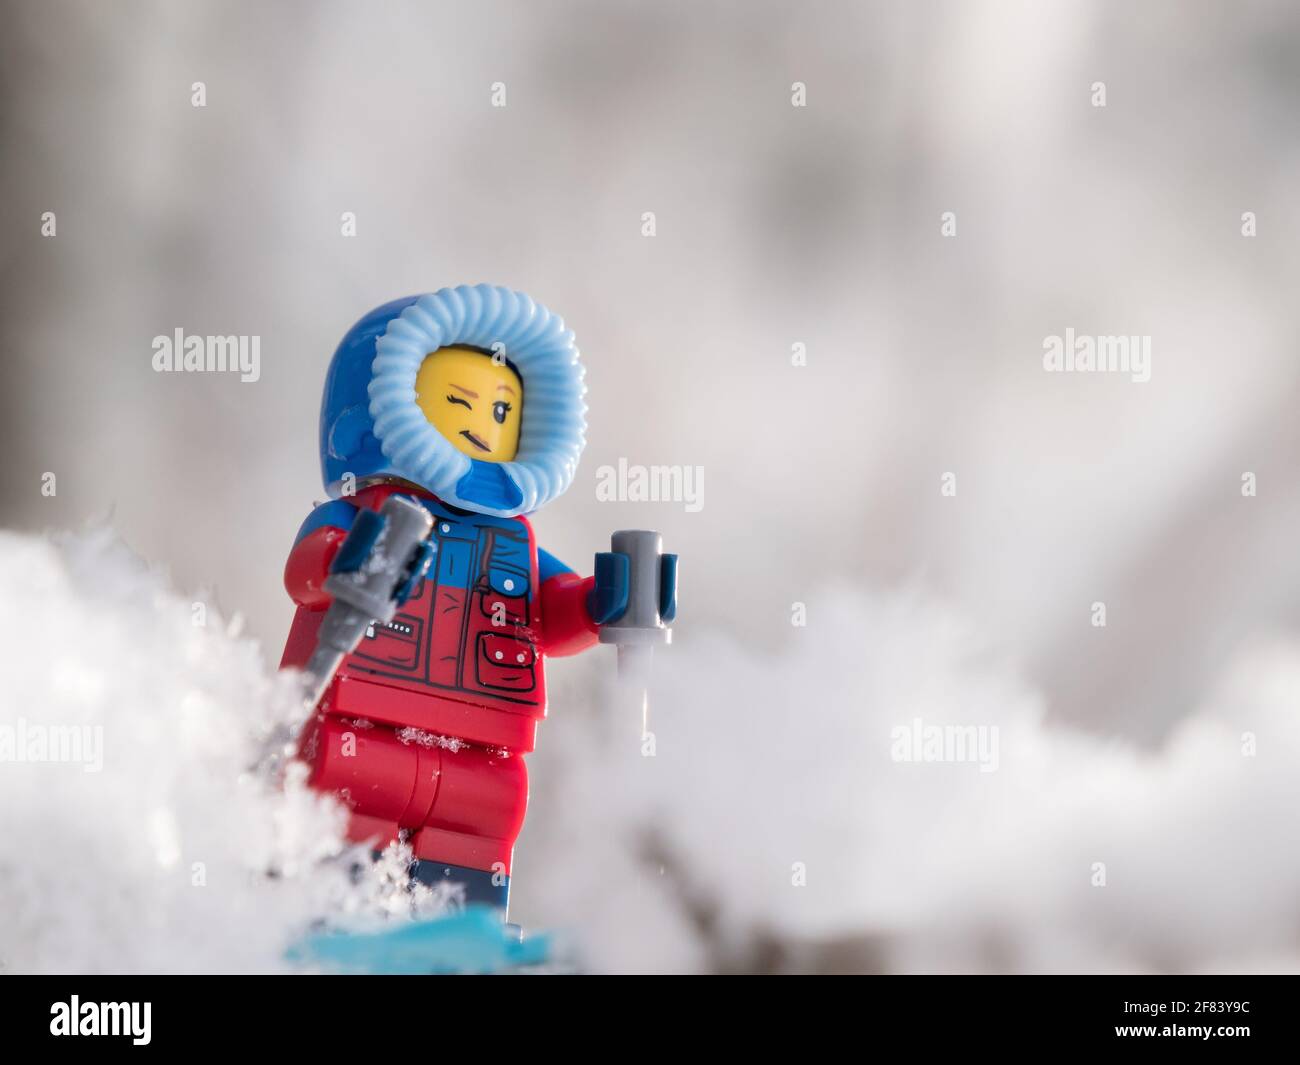 Lego skier minifigure smiling surrounded by snow Stock Photo - Alamy